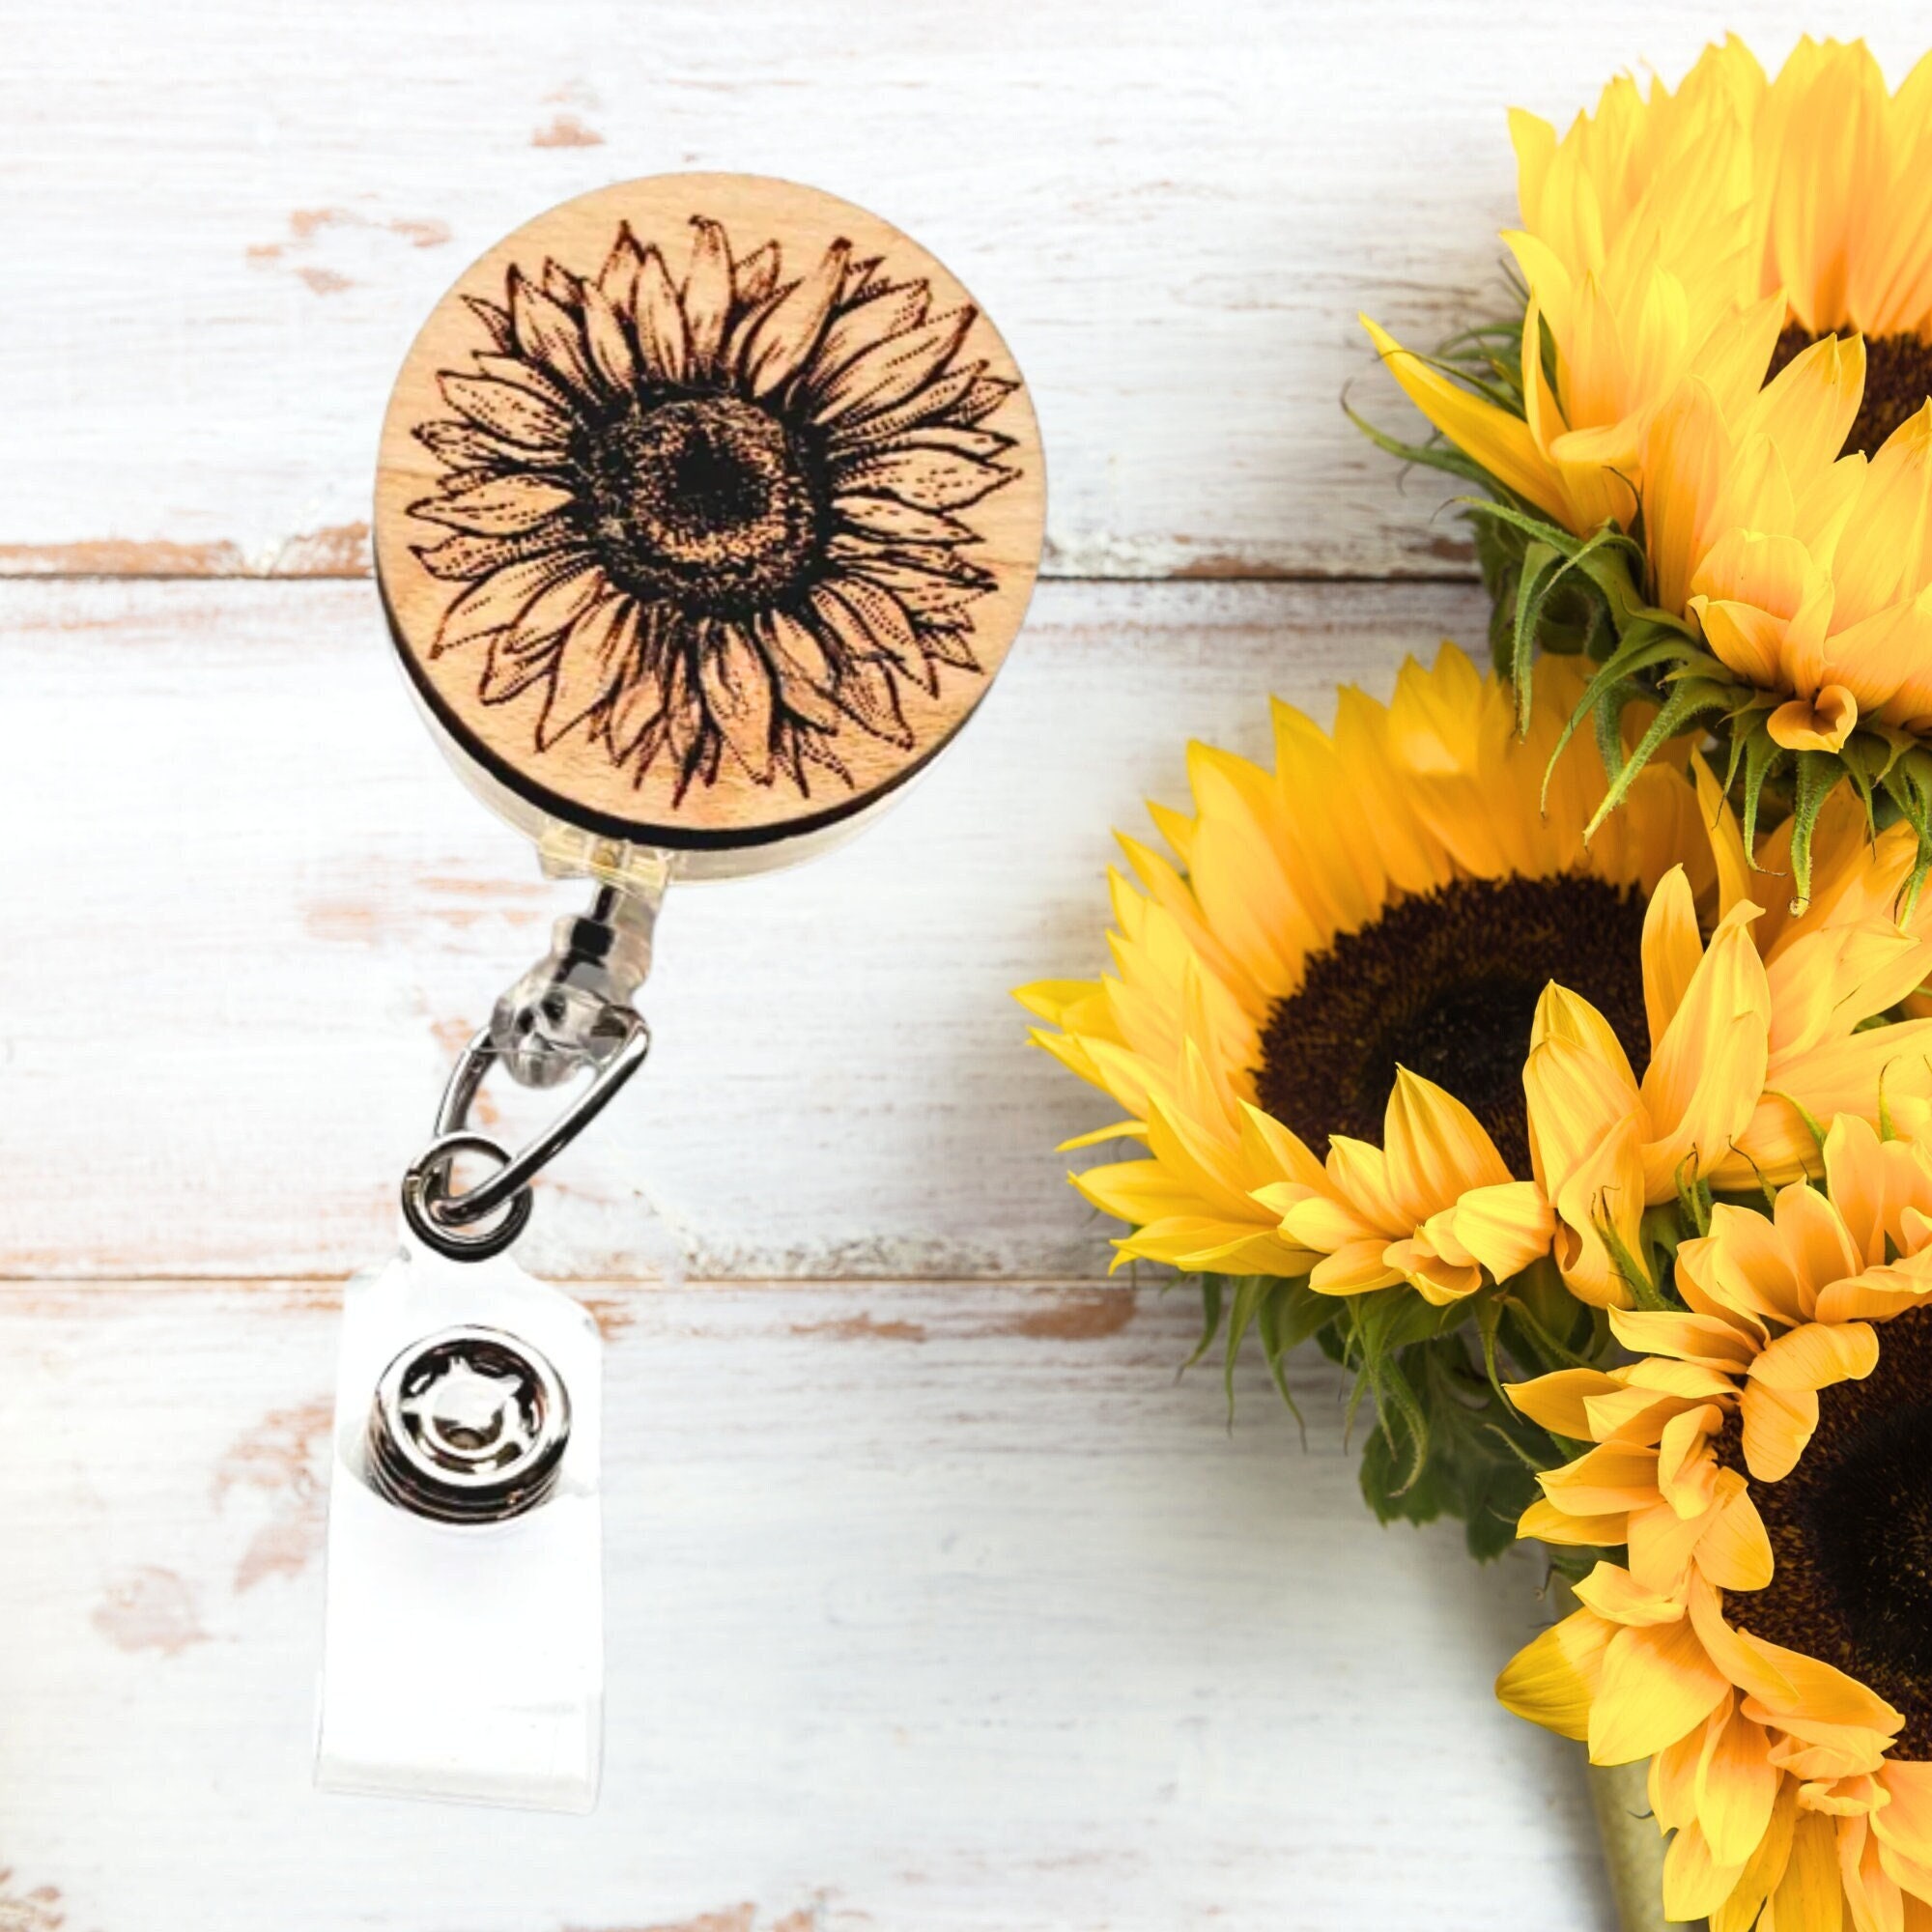 Clothing & Accessories :: Keychains & Lanyards :: Badge Holders & Reels :: Sunflower  Retractable Badge Reel, Laser Engraved Work Name Tag Holder